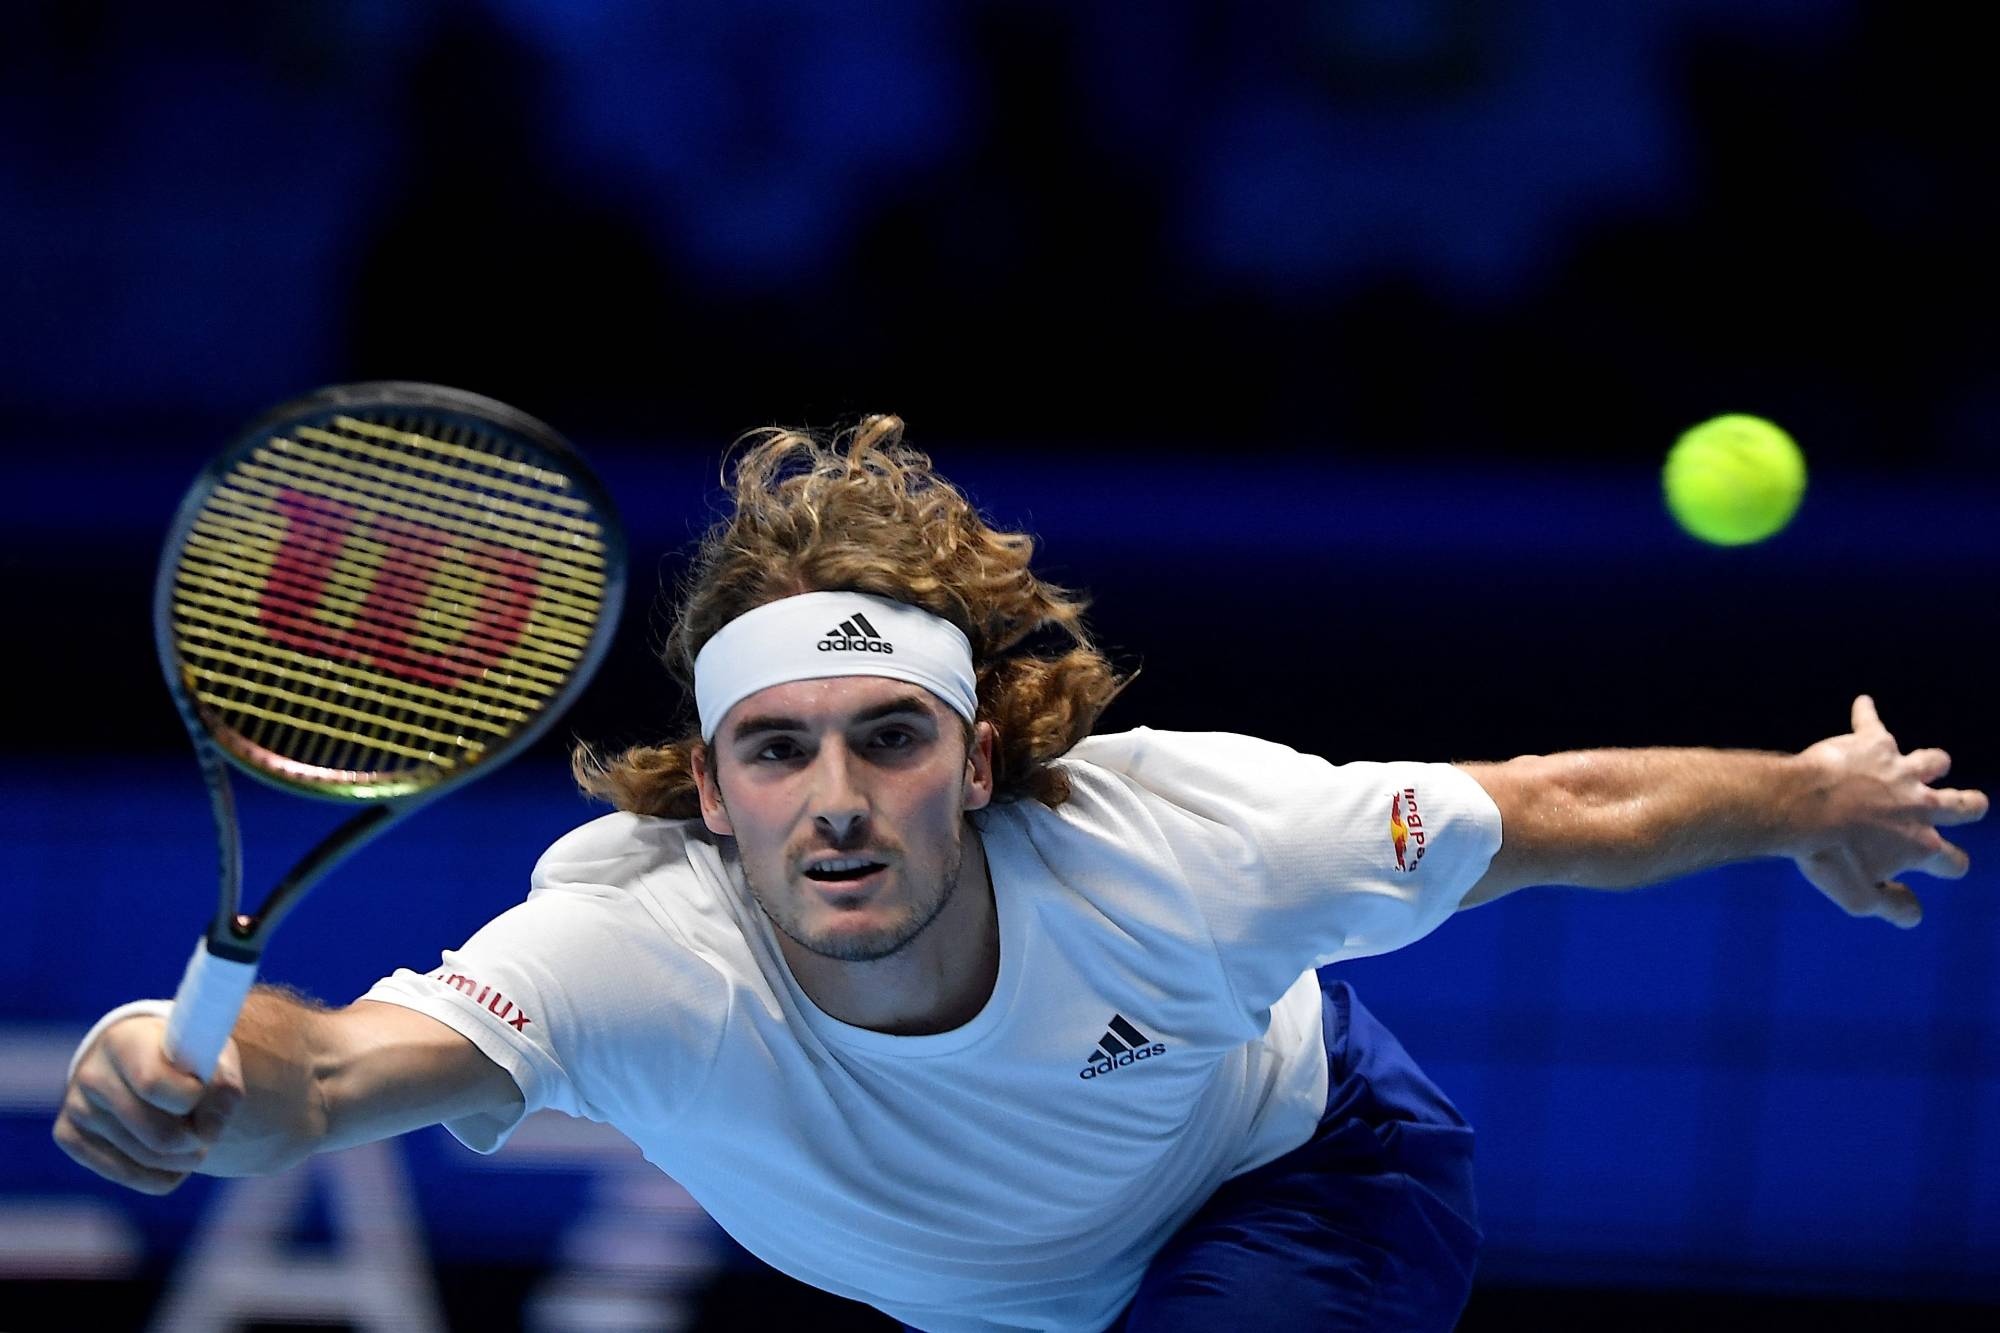 Stefanos Tsitsipas tongue-twisting name lands on list of most mispronounced words in U.S.